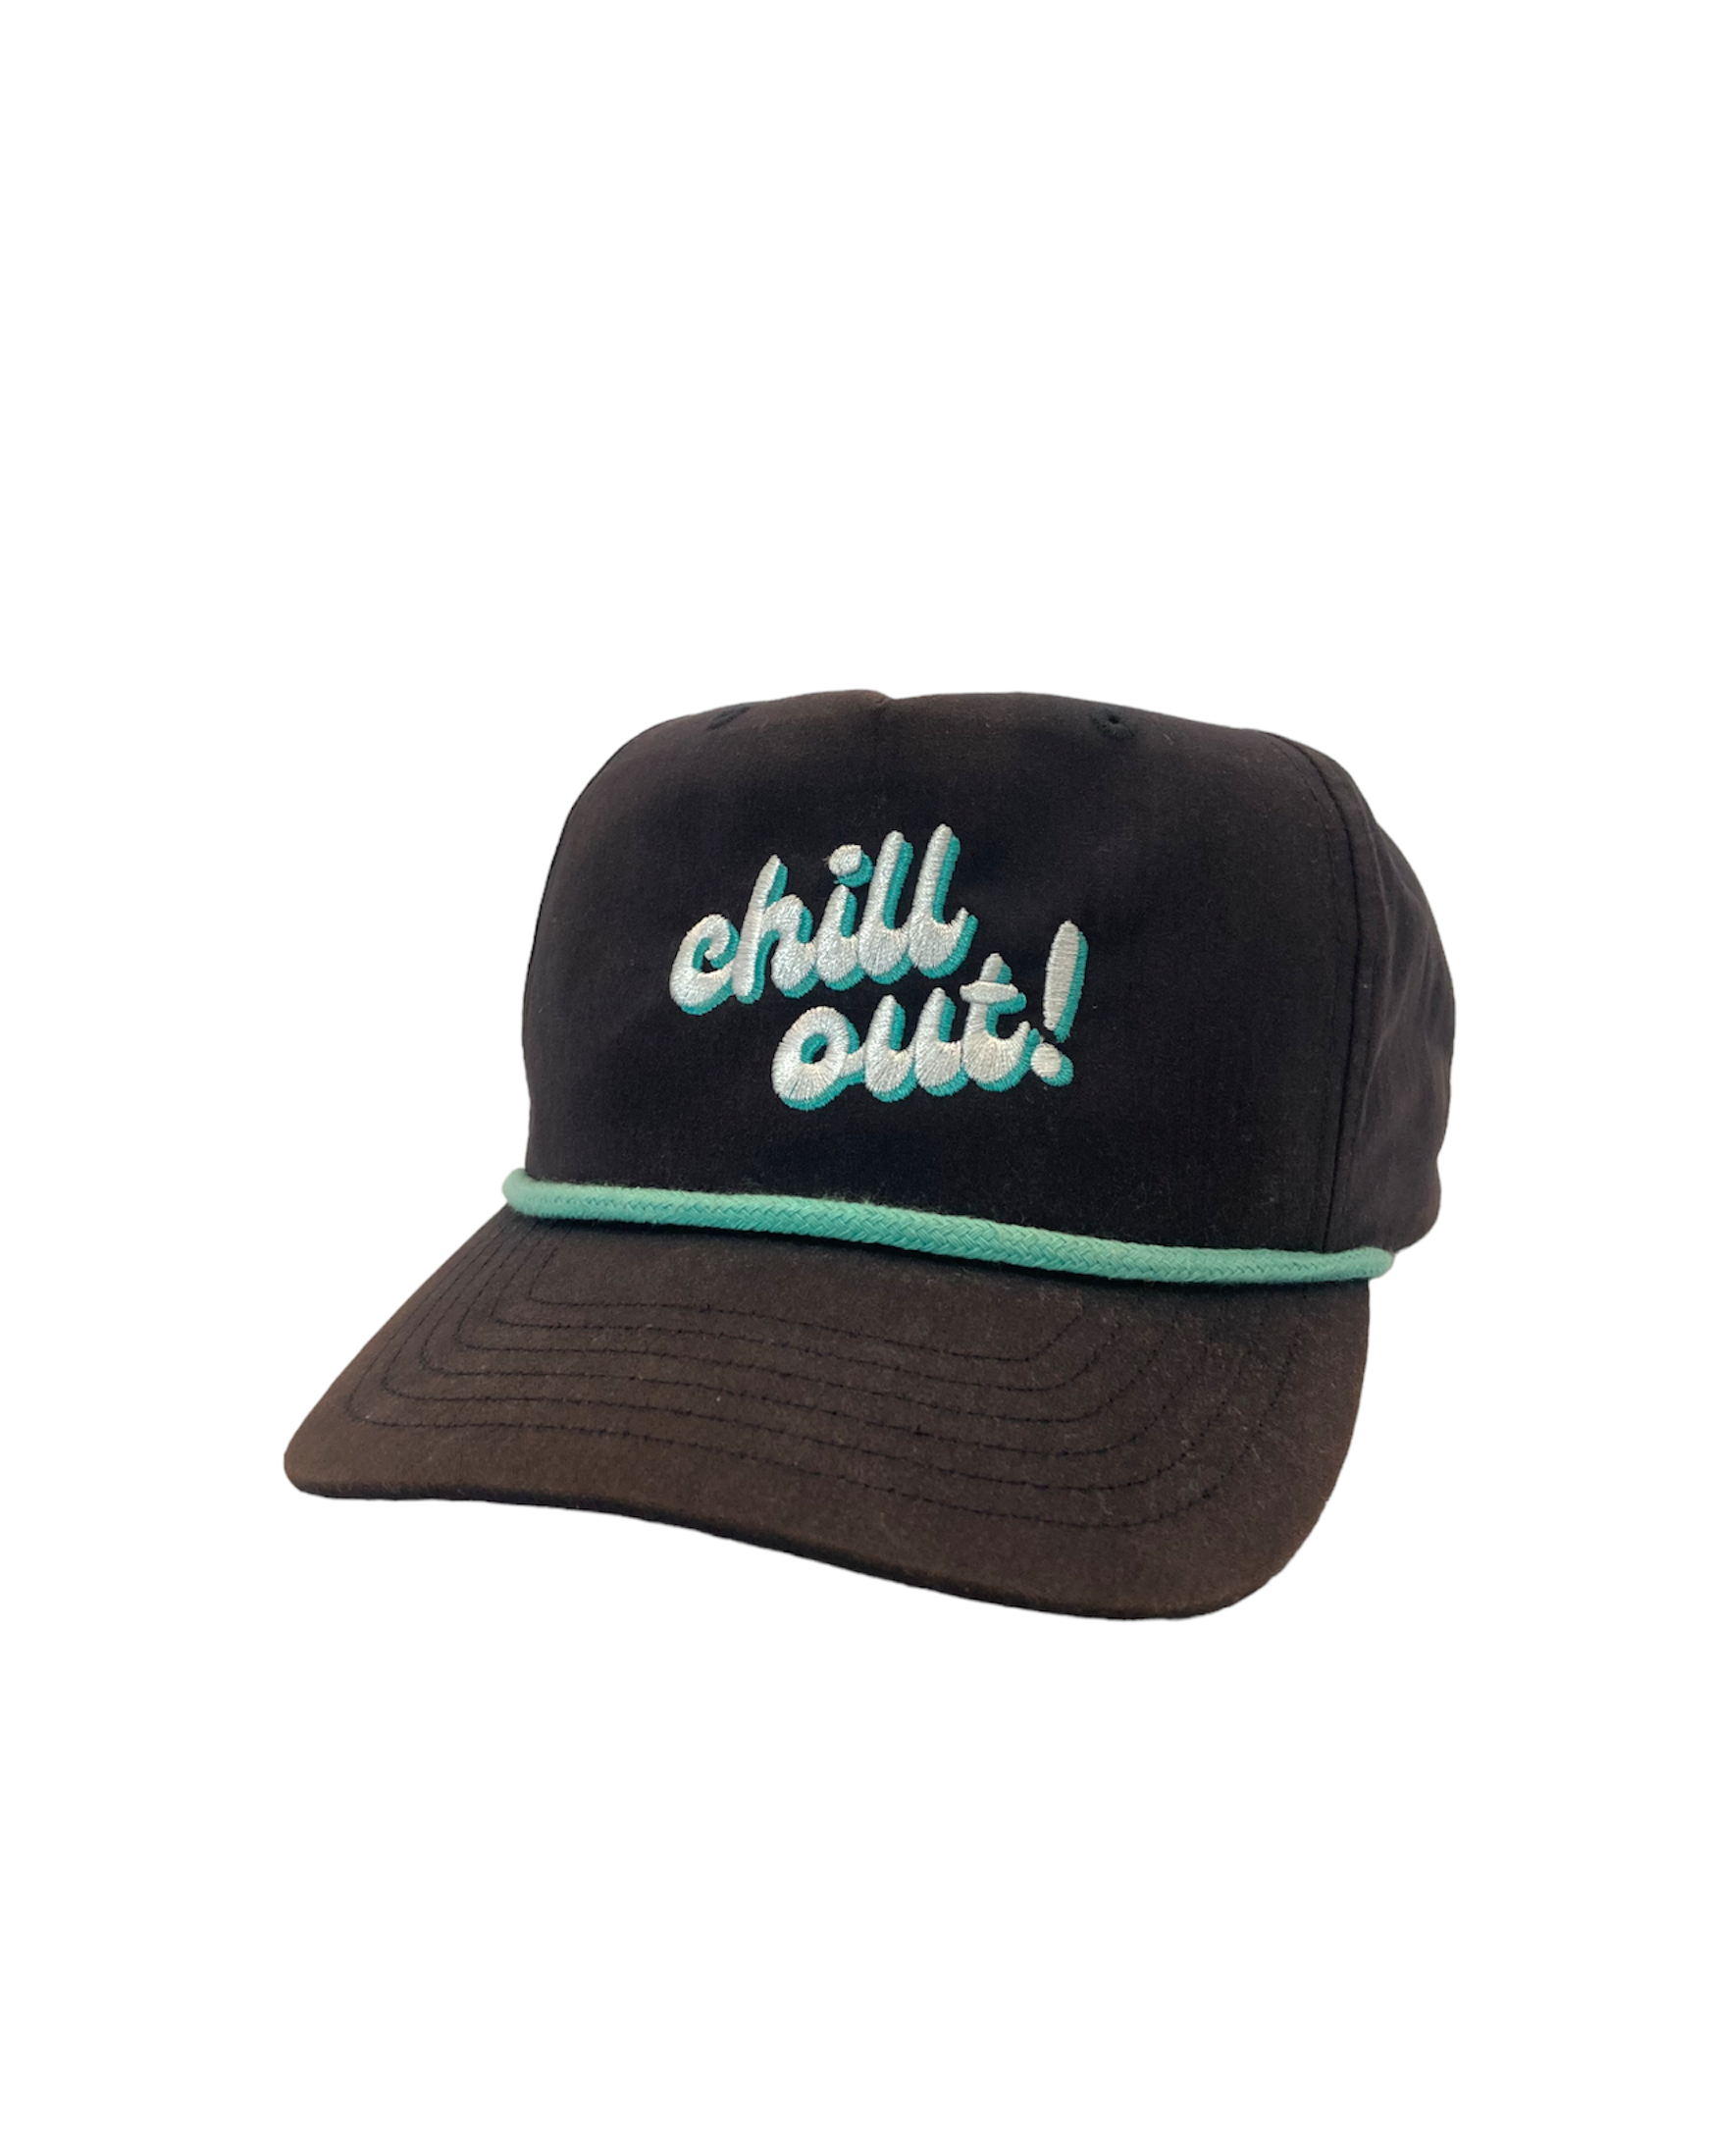 – Out! Chiller Hat Chill